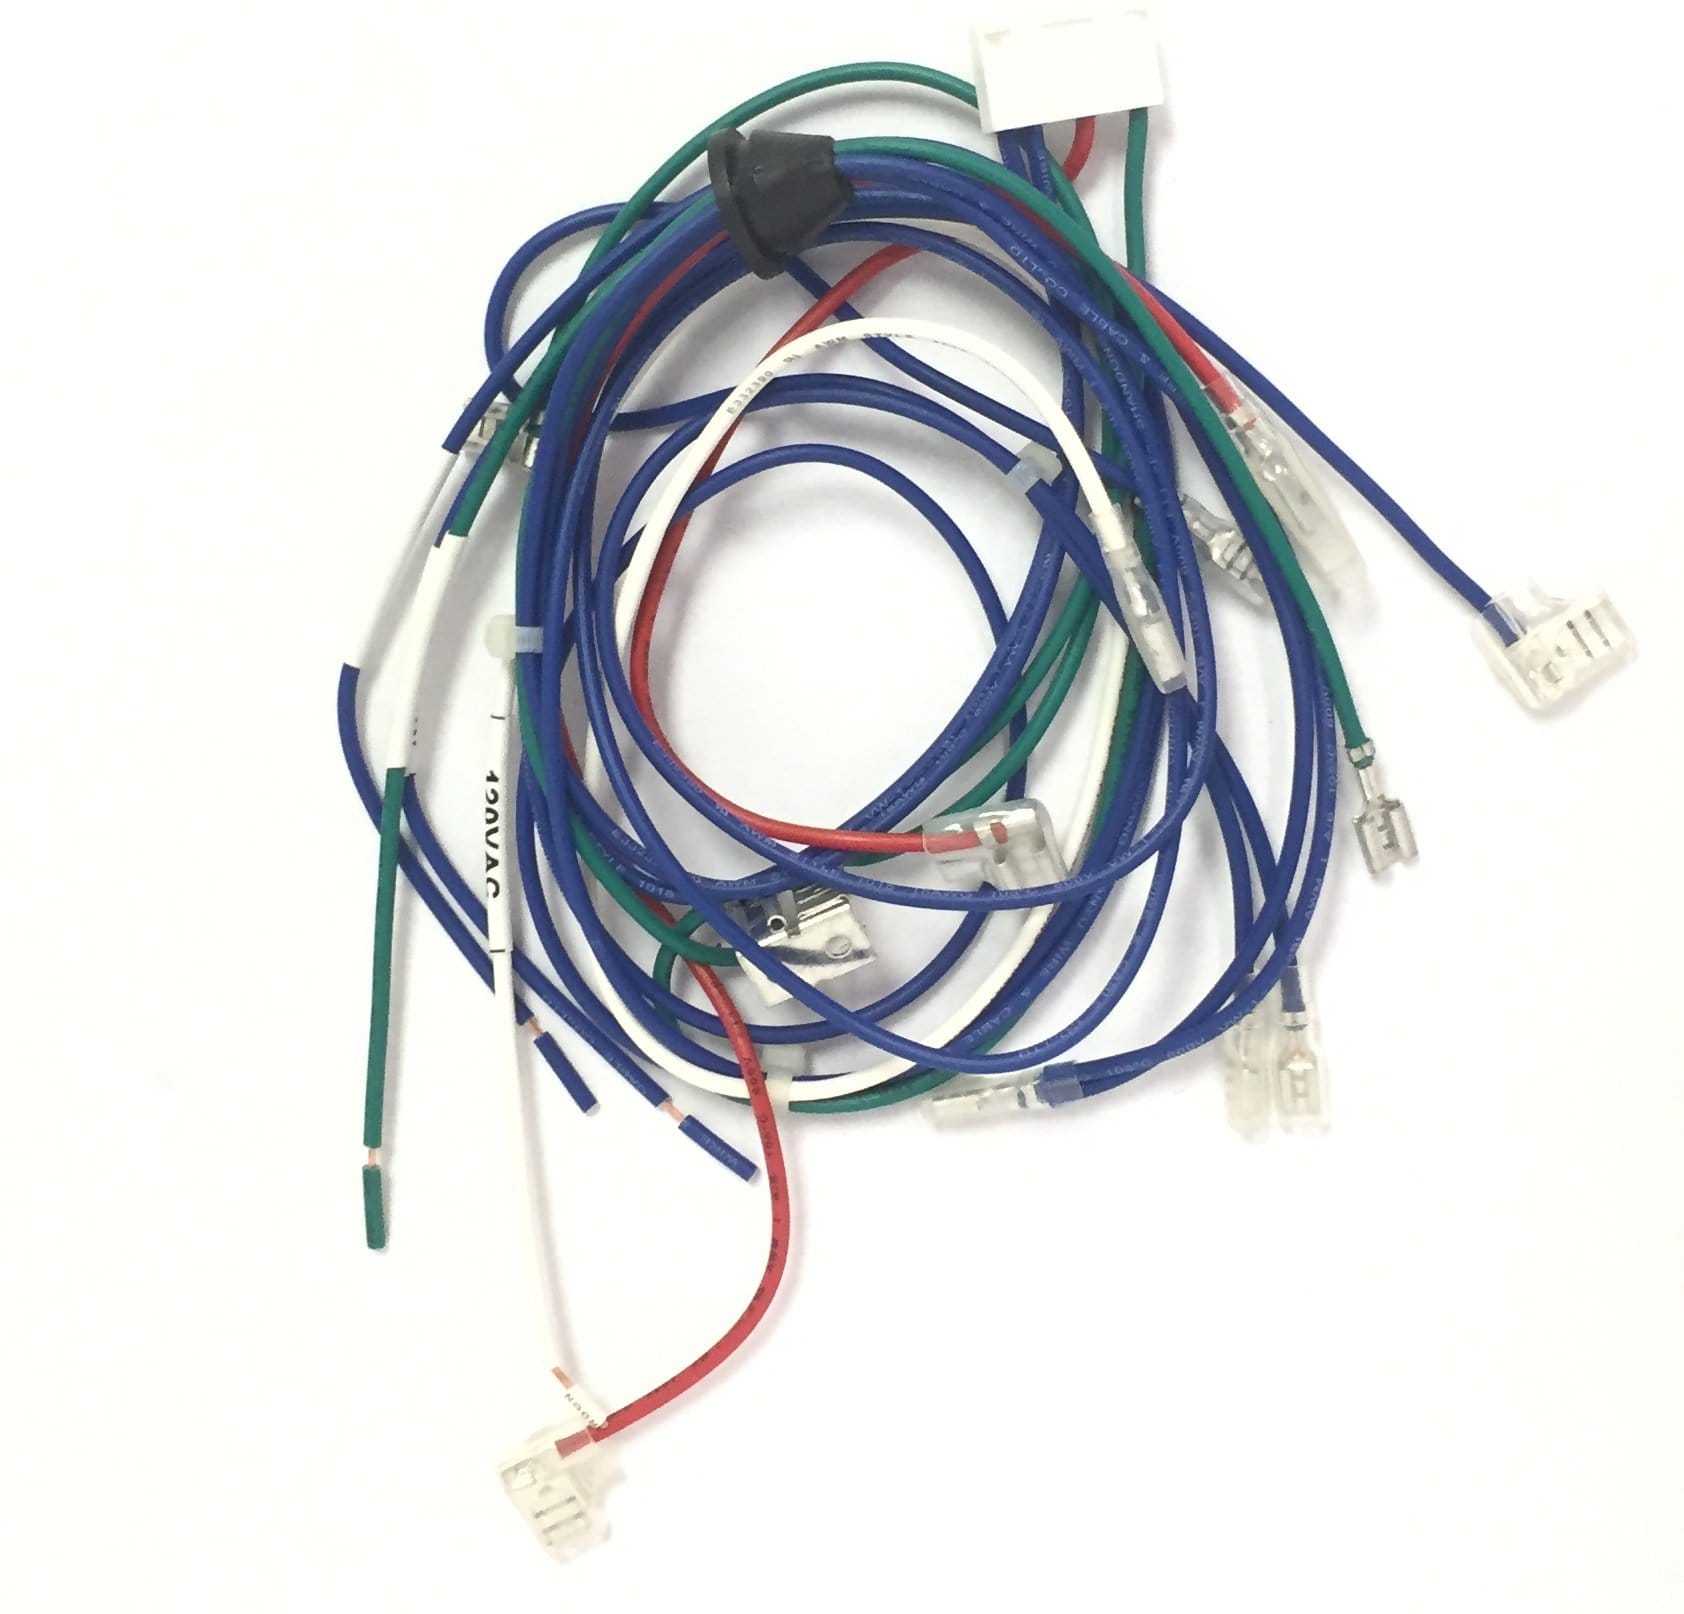 Atwood 31123 HydroFlame Furnace Wiring Harness